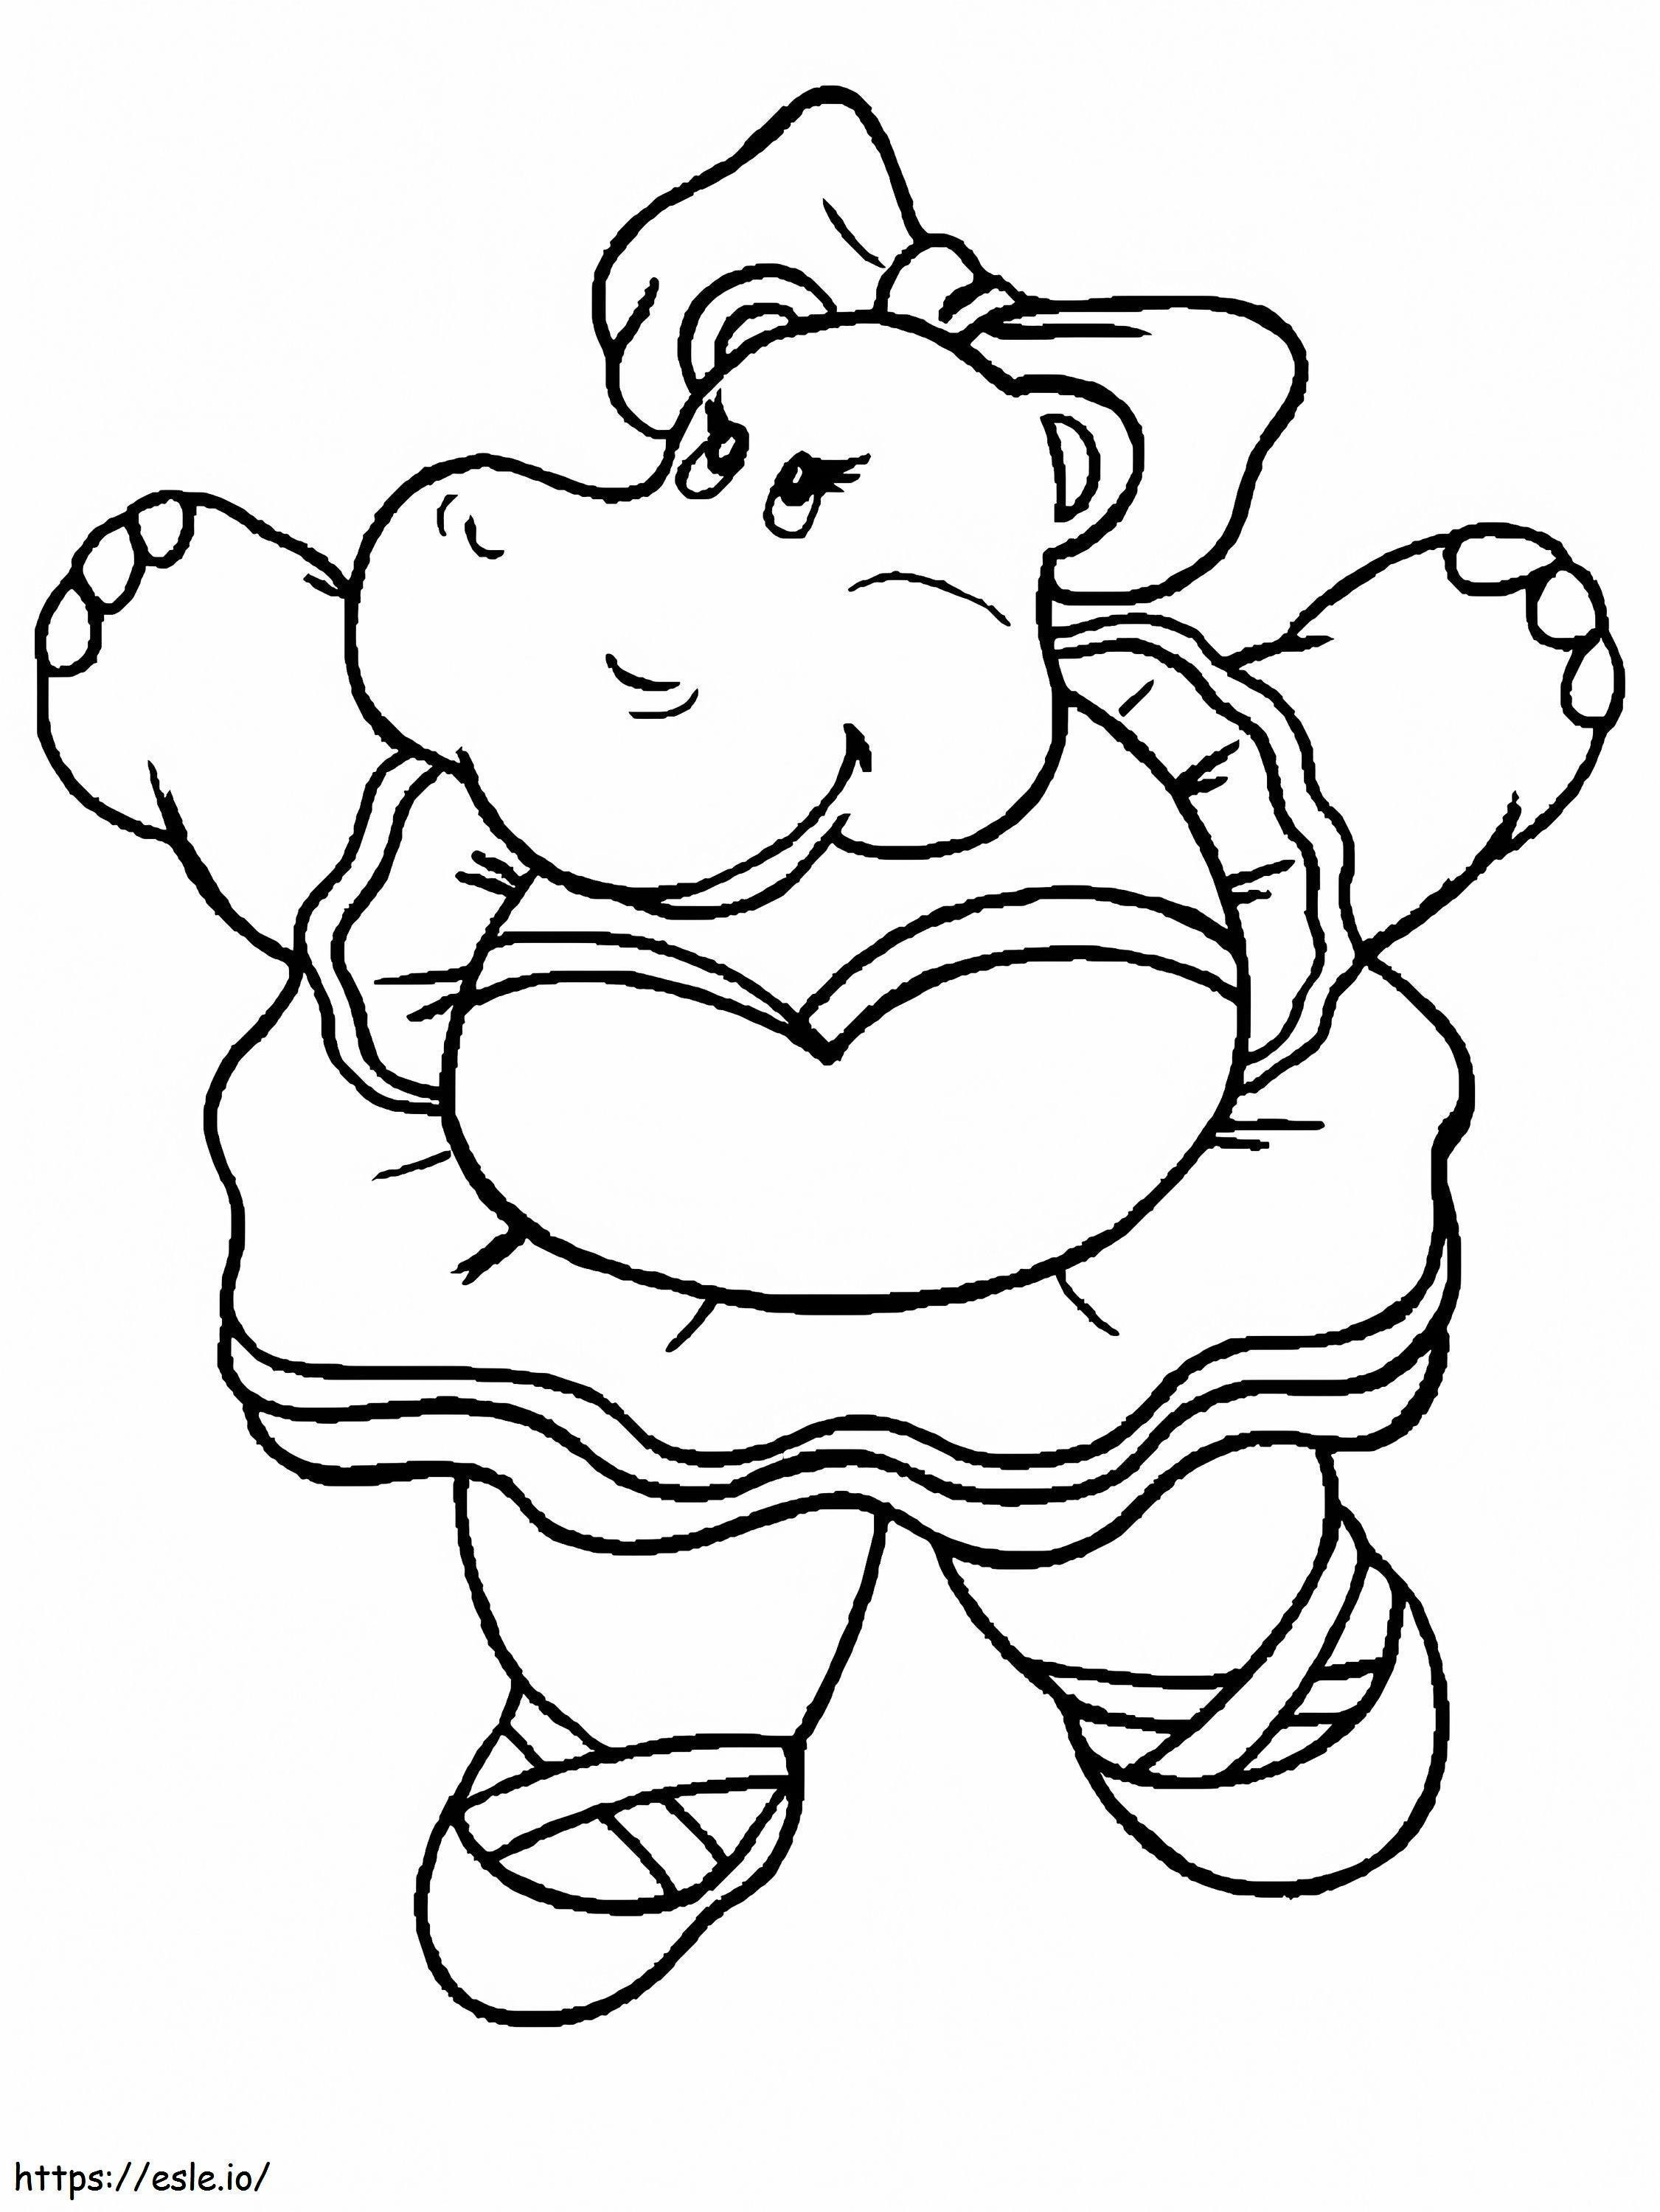 1545182111 Funny Animal Funny Exercise For Kids coloring page